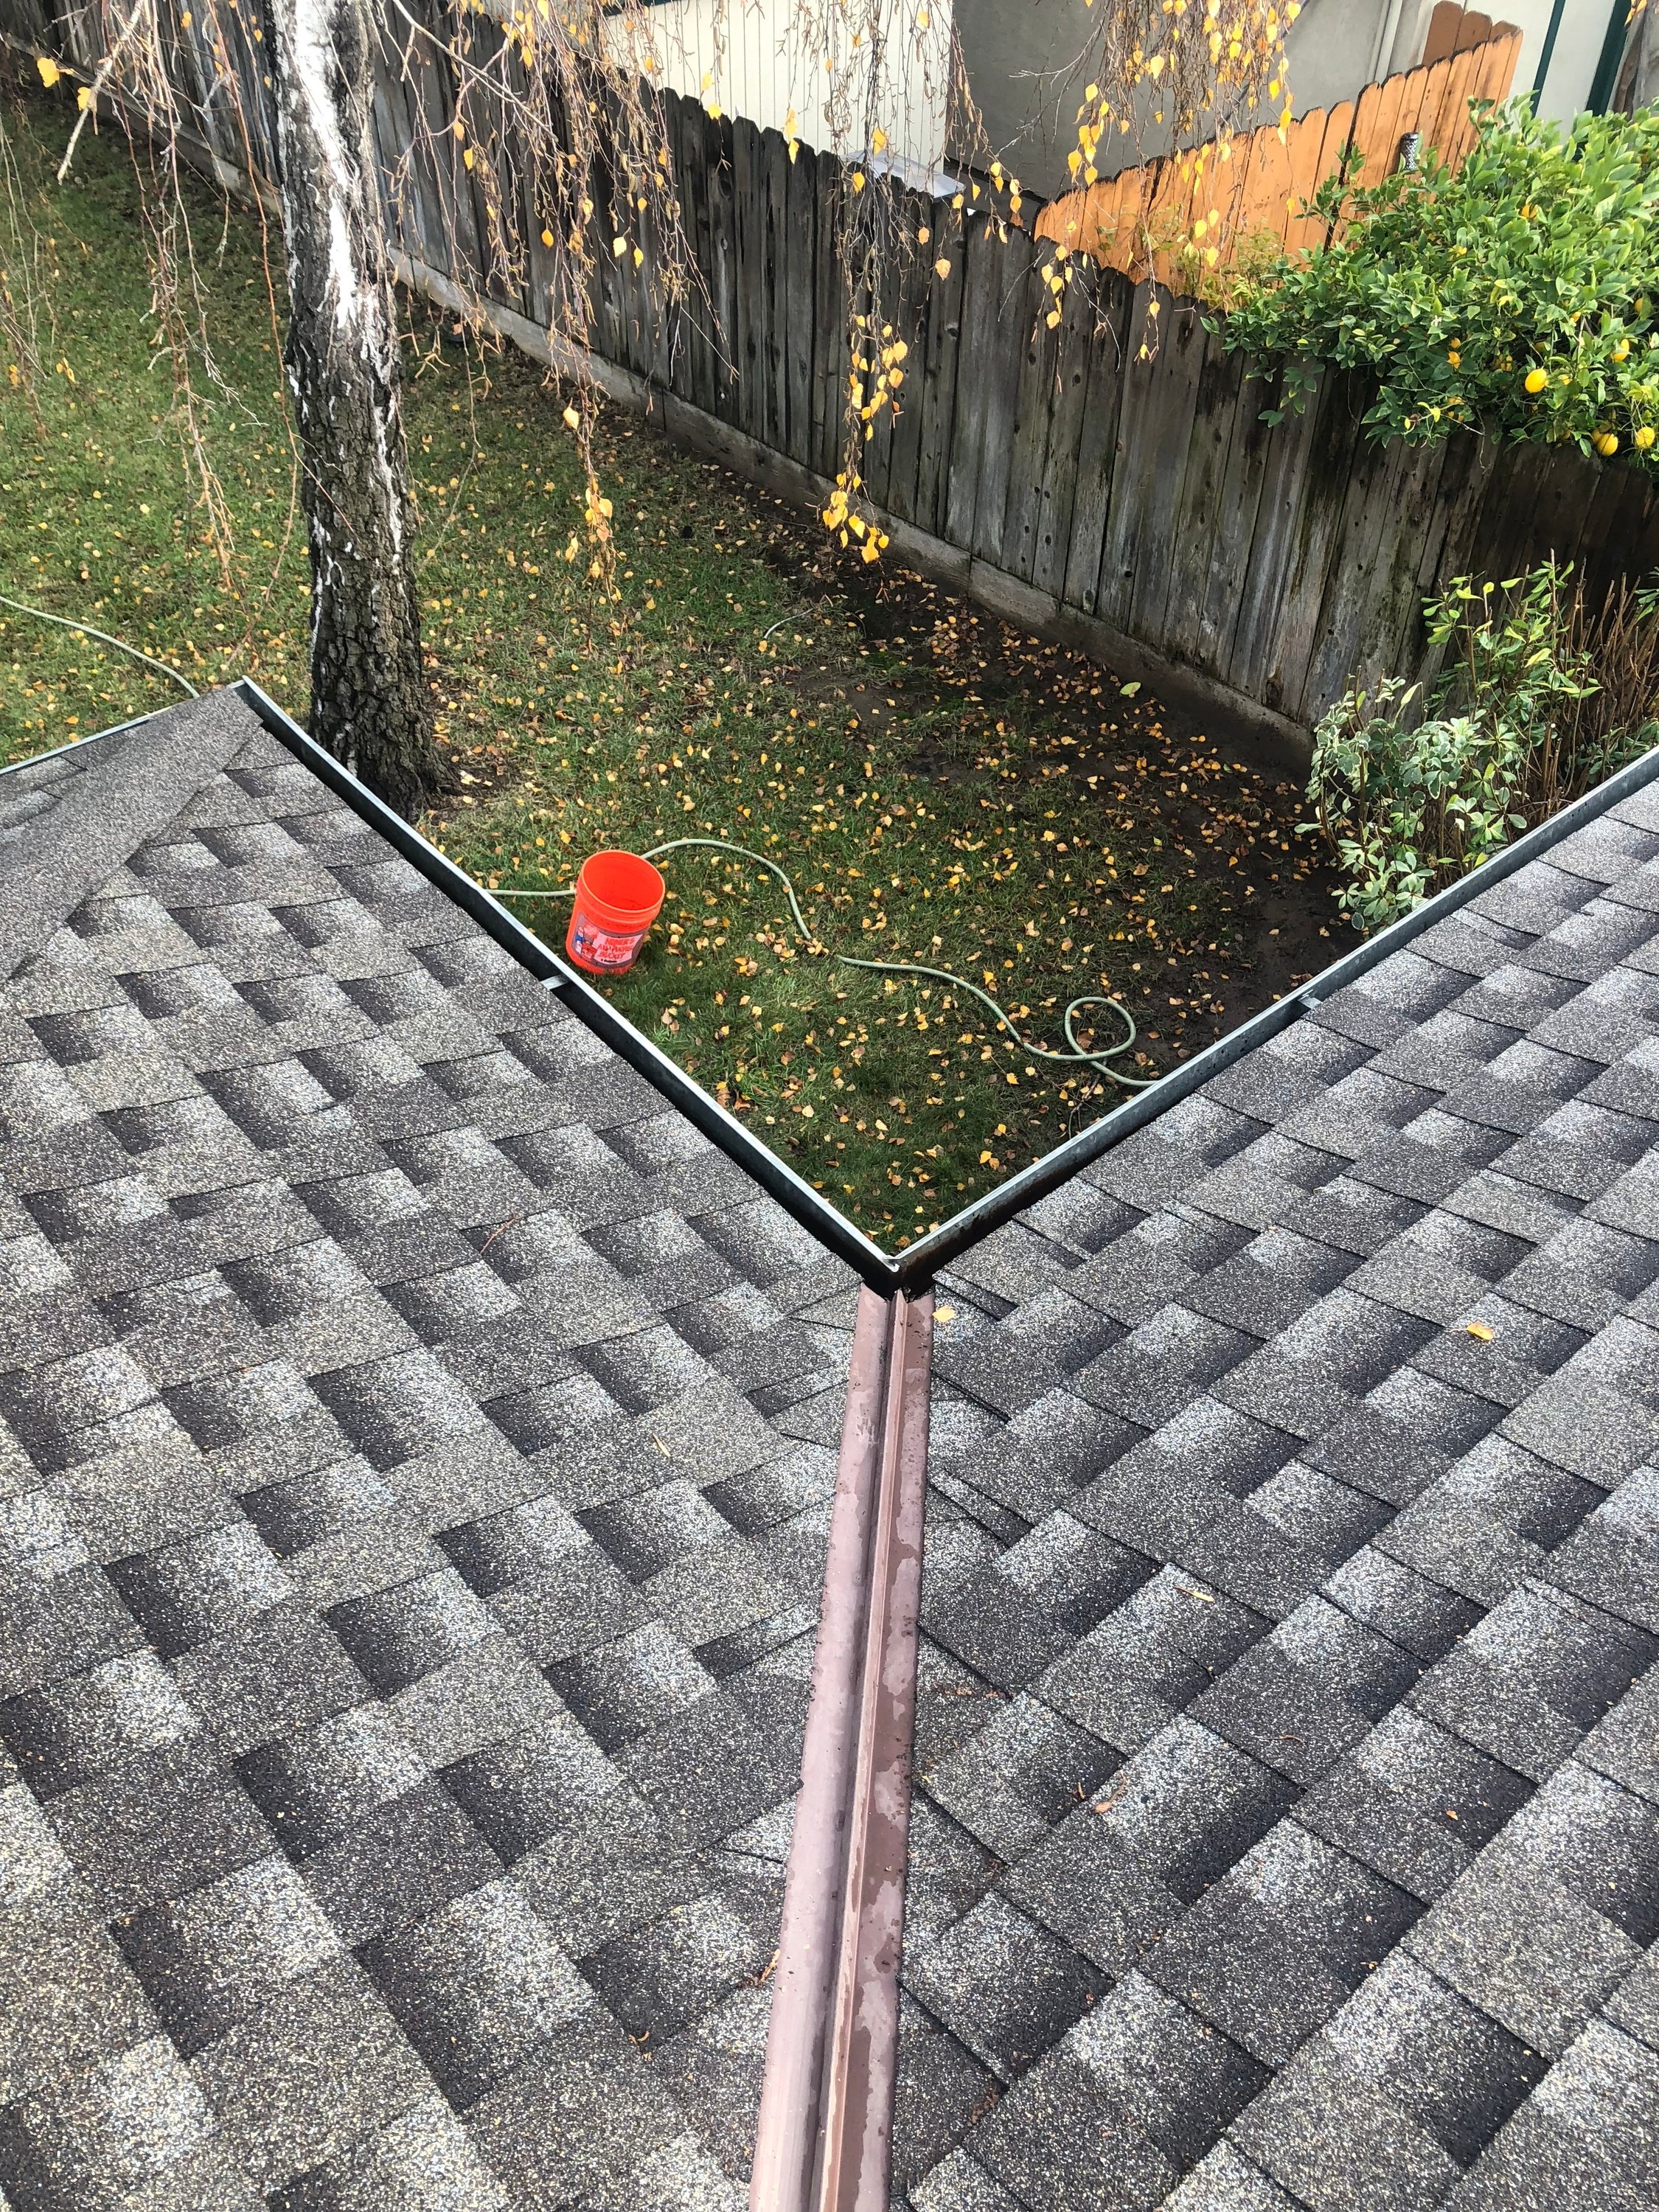 Clean Pro Gutter Cleaning Springfield cover